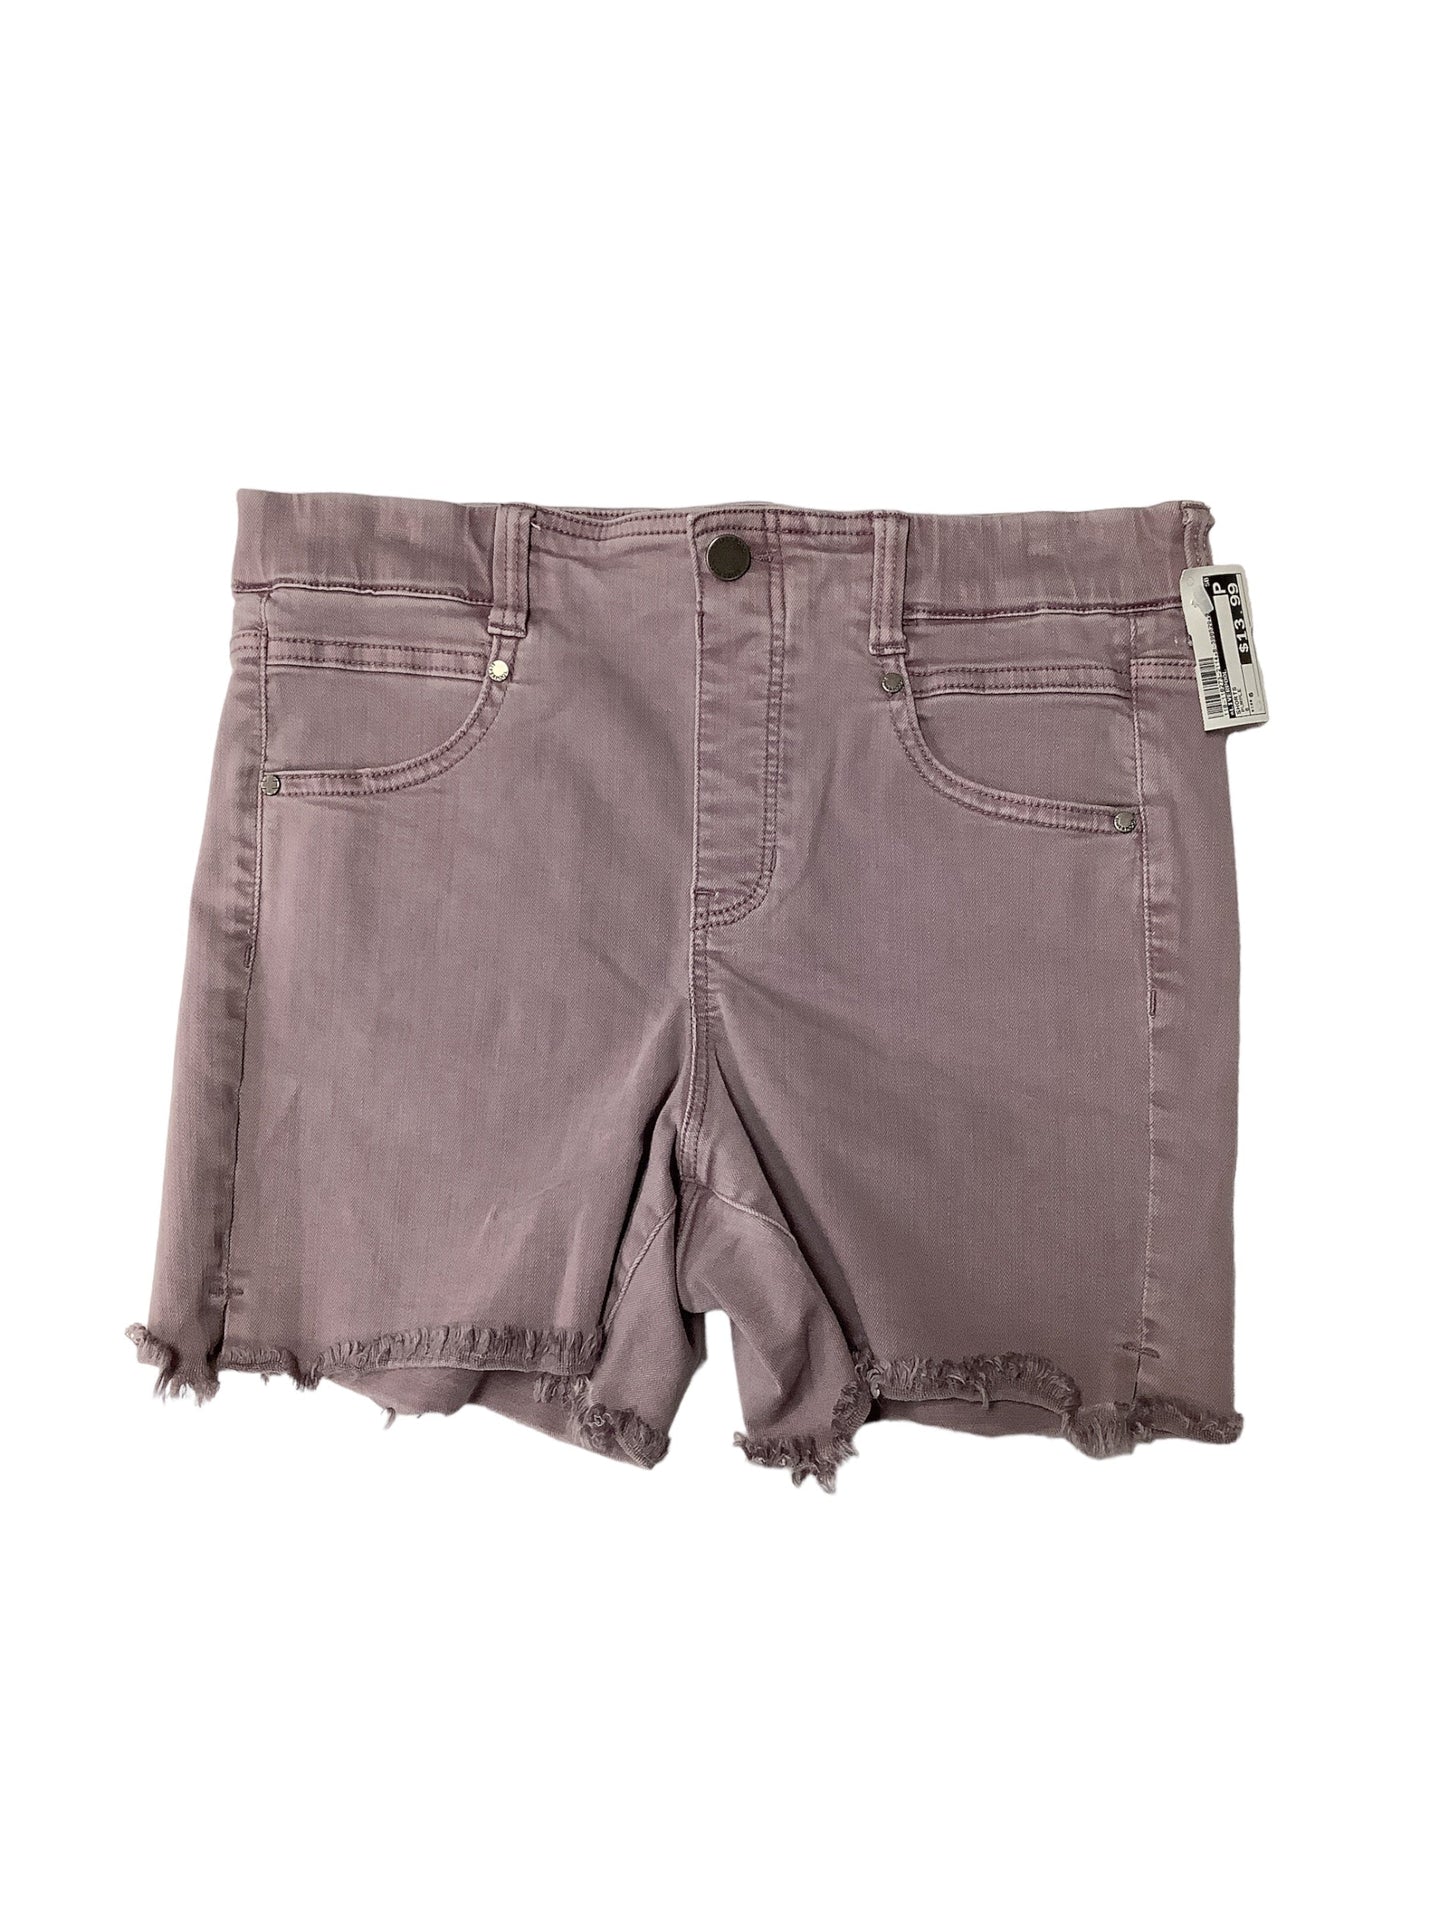 Shorts By Liverpool  Size: 6